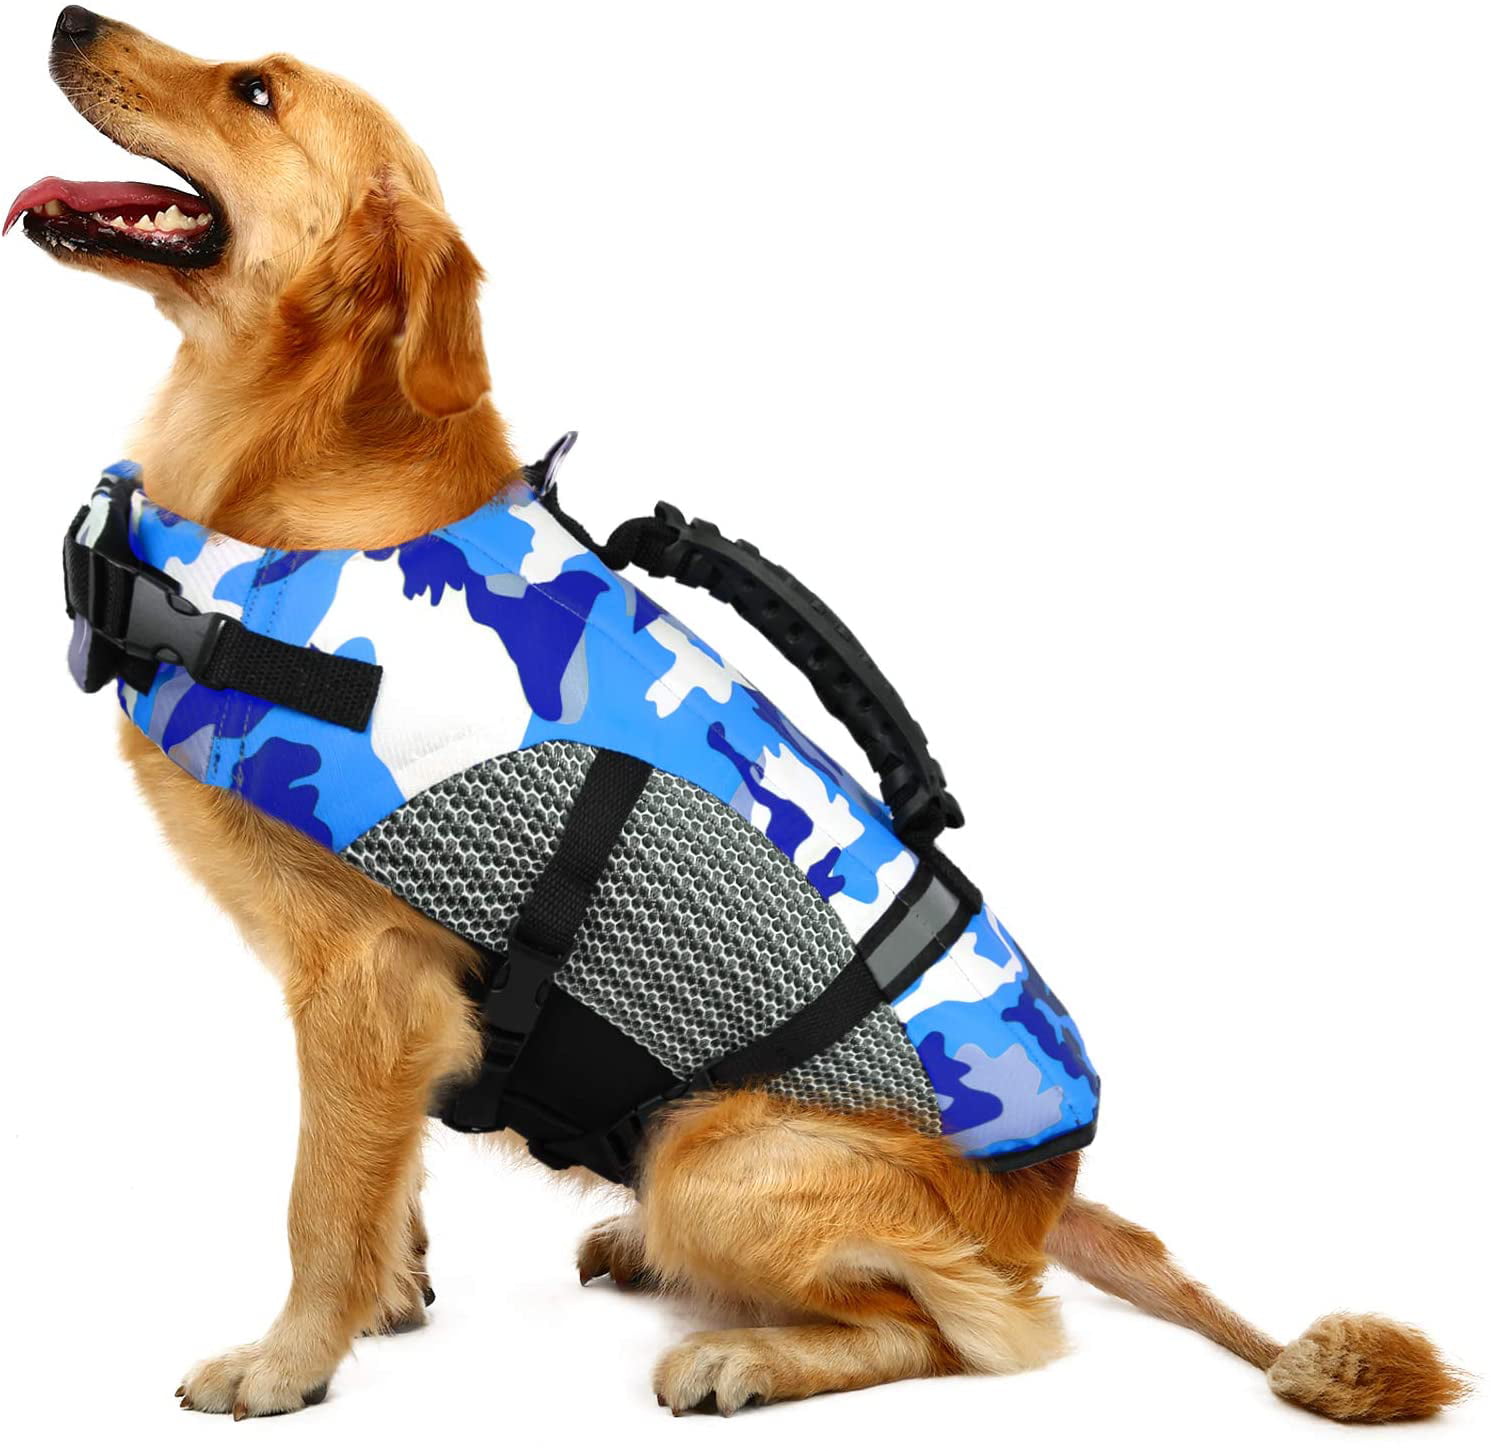 Medium Huret Reflective Dog Life Jackets XS Adjustable Preserver Swimsuit with Rescue Handle for Small Blue Large Dogs Ripstop Pet Dog Safety Vest